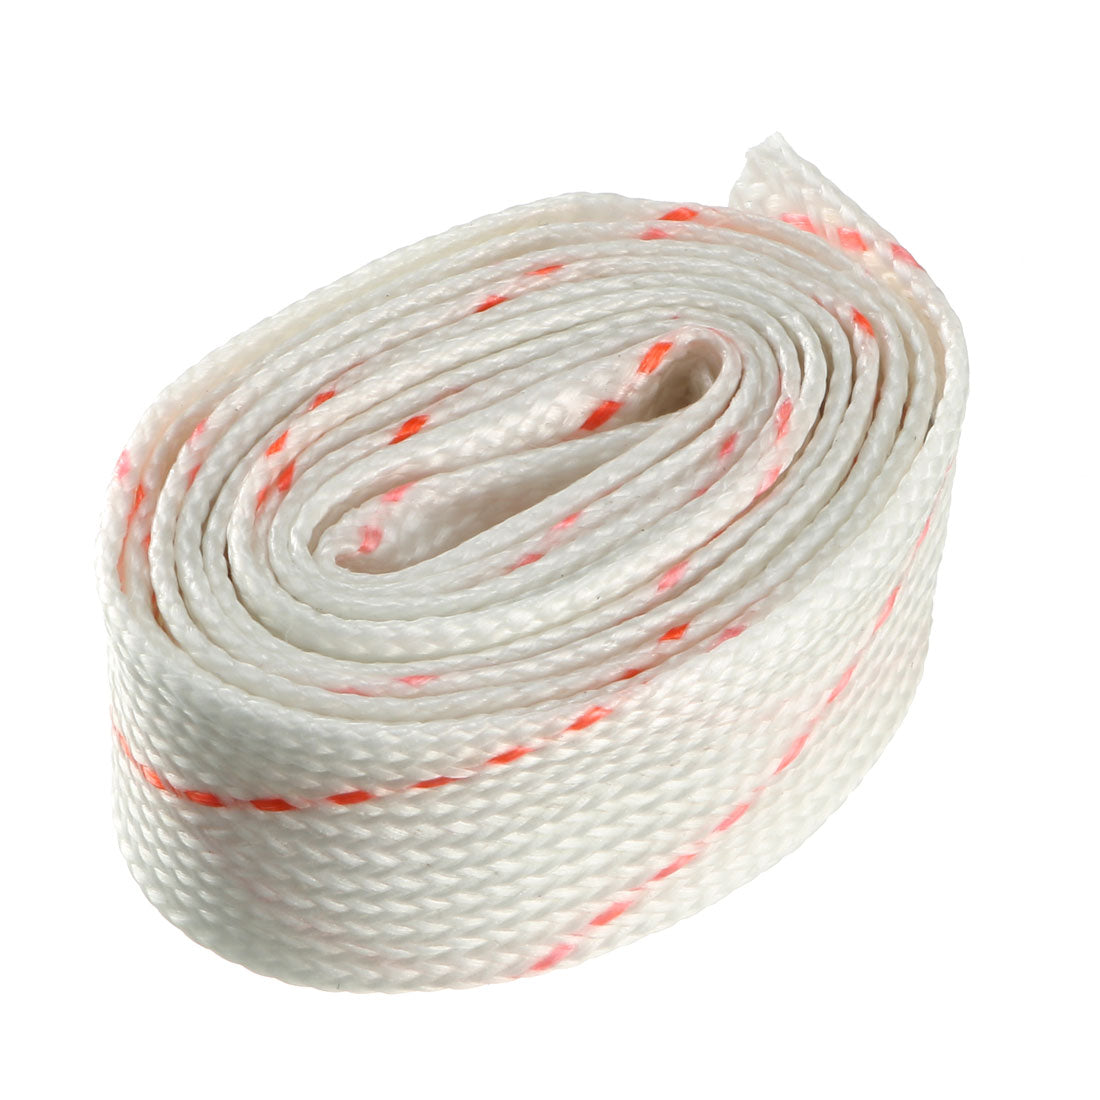 uxcell Uxcell Fiberglass Sleeve 10mm I.D. PVC Insulation Tubing 1500V Tube Adjustable Sleeving Pipe 125 Degree Centigrade Cable Wrap Wire 750mm 2.46ft White and Red